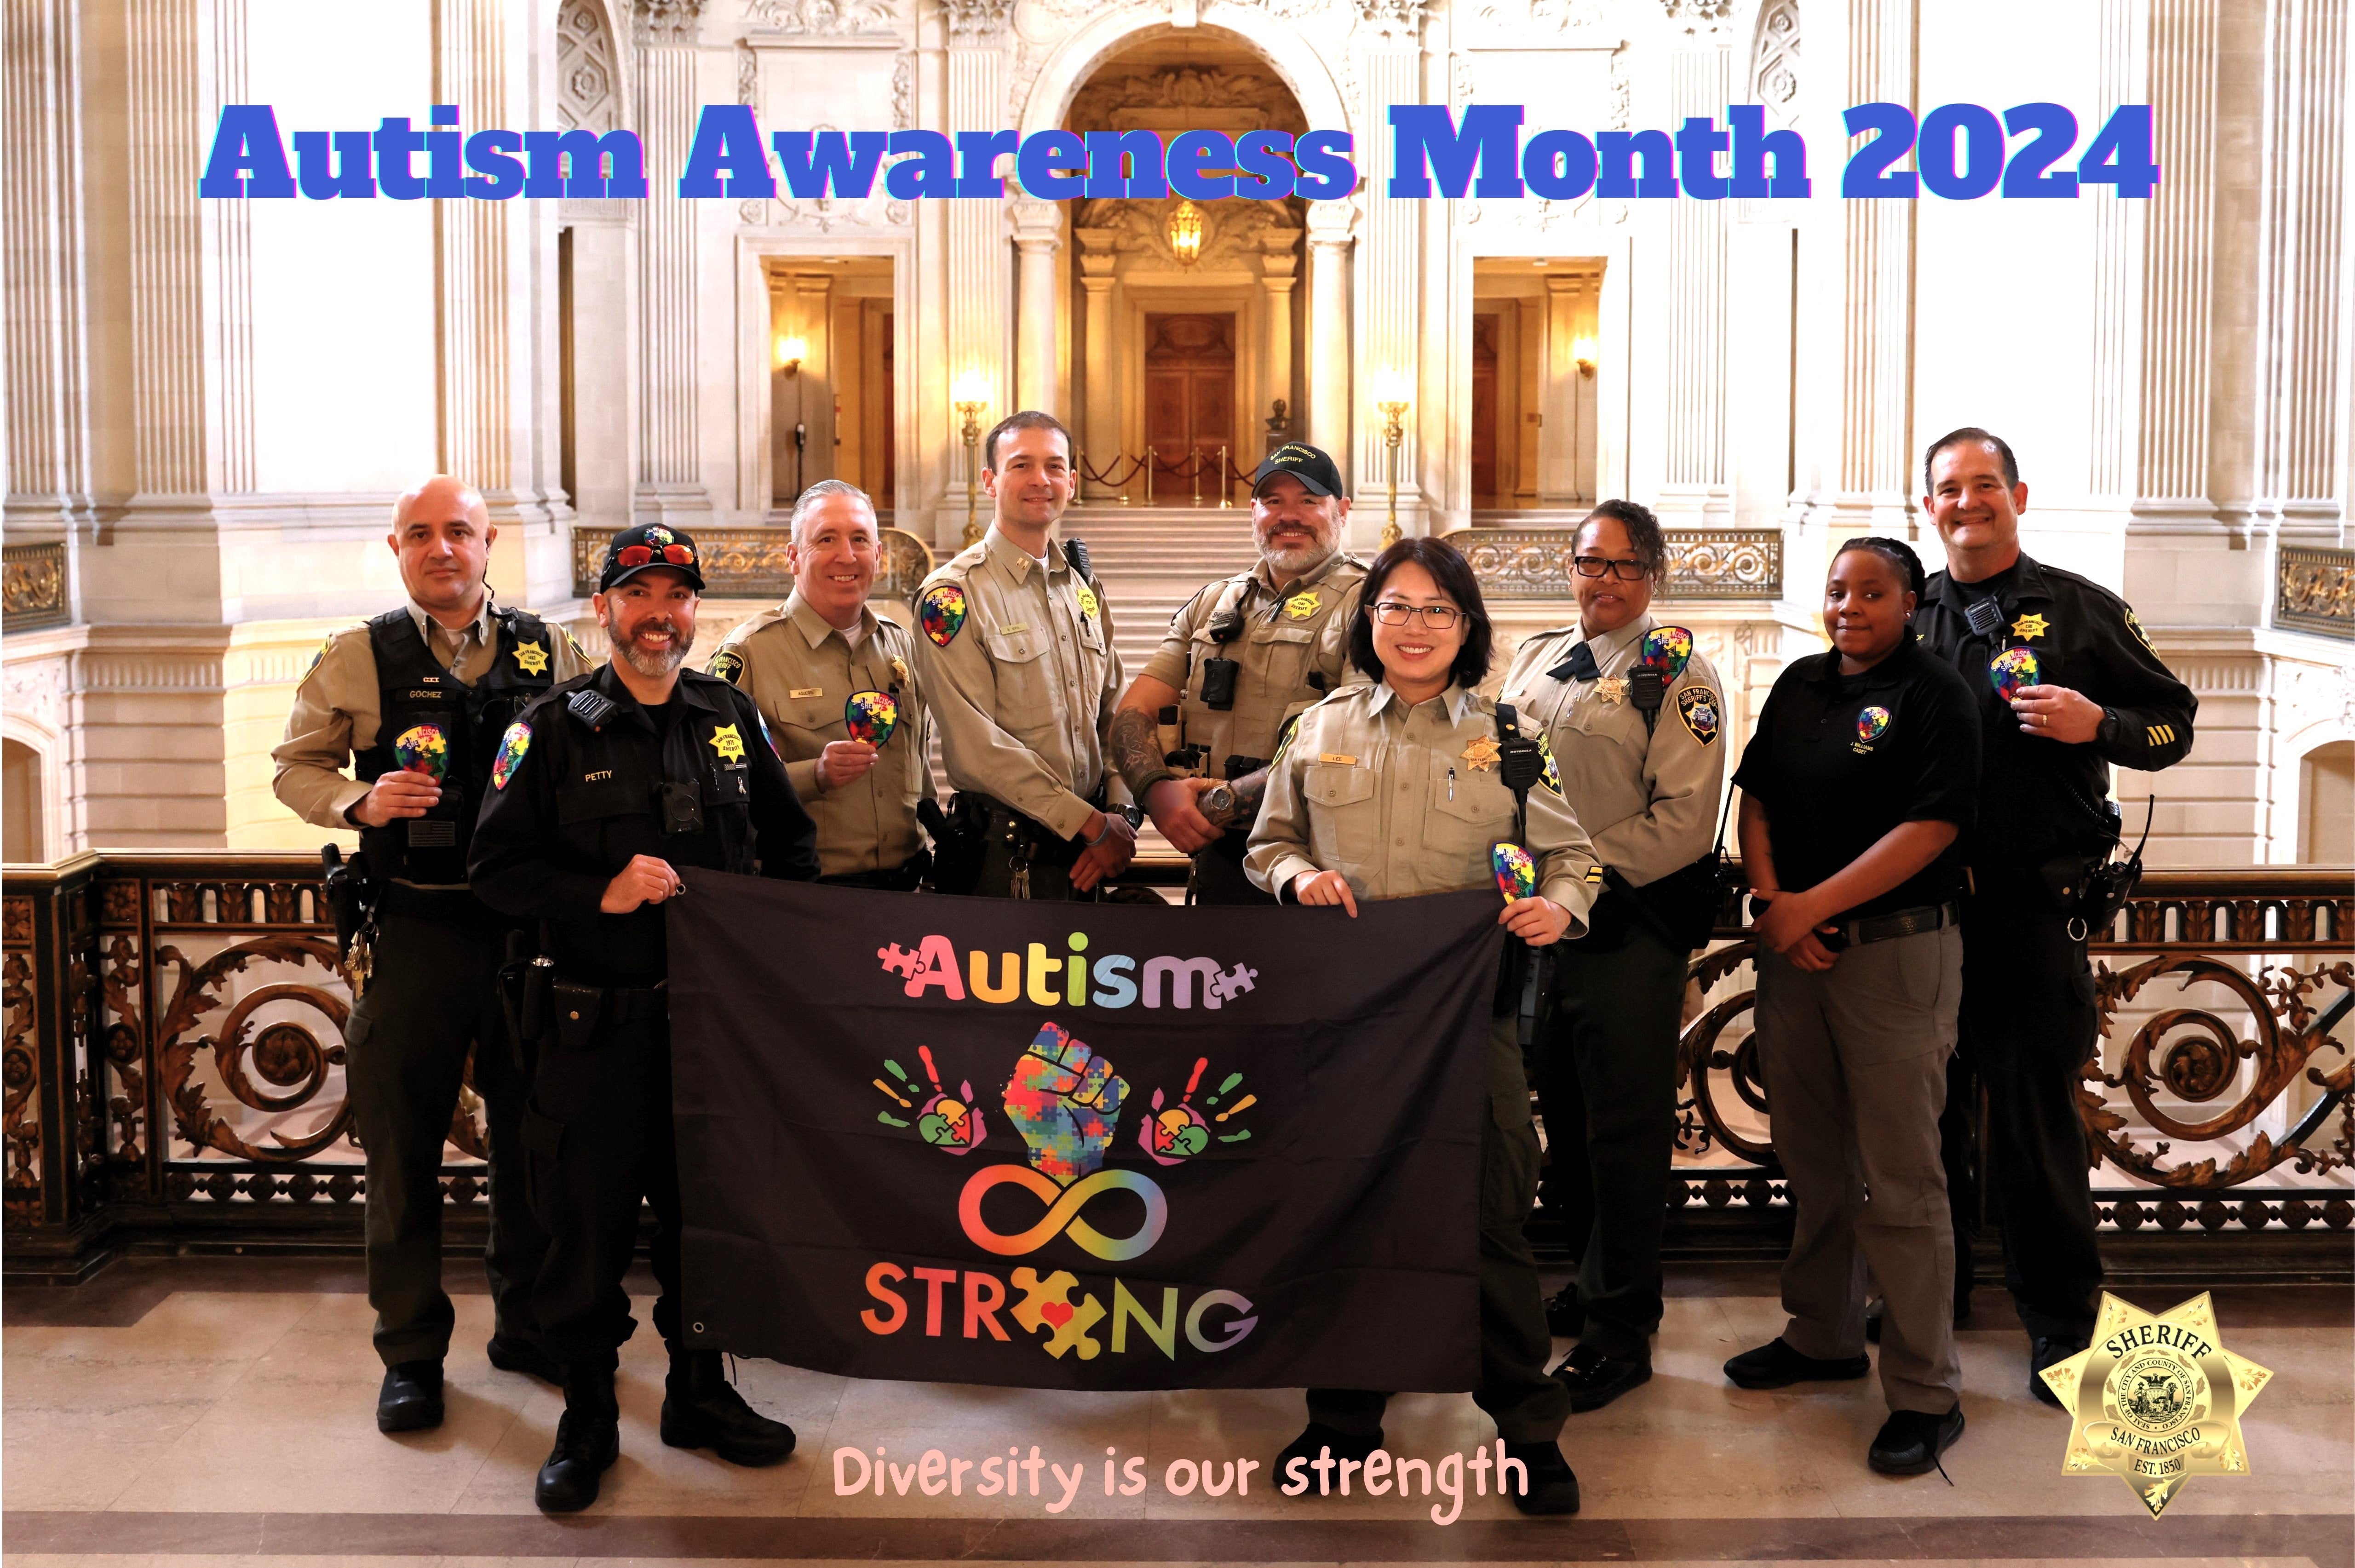 During Autism Awareness Month, the Sheriff's Office recognizes and supports our neurodiverse family members, colleagues, and friends. 